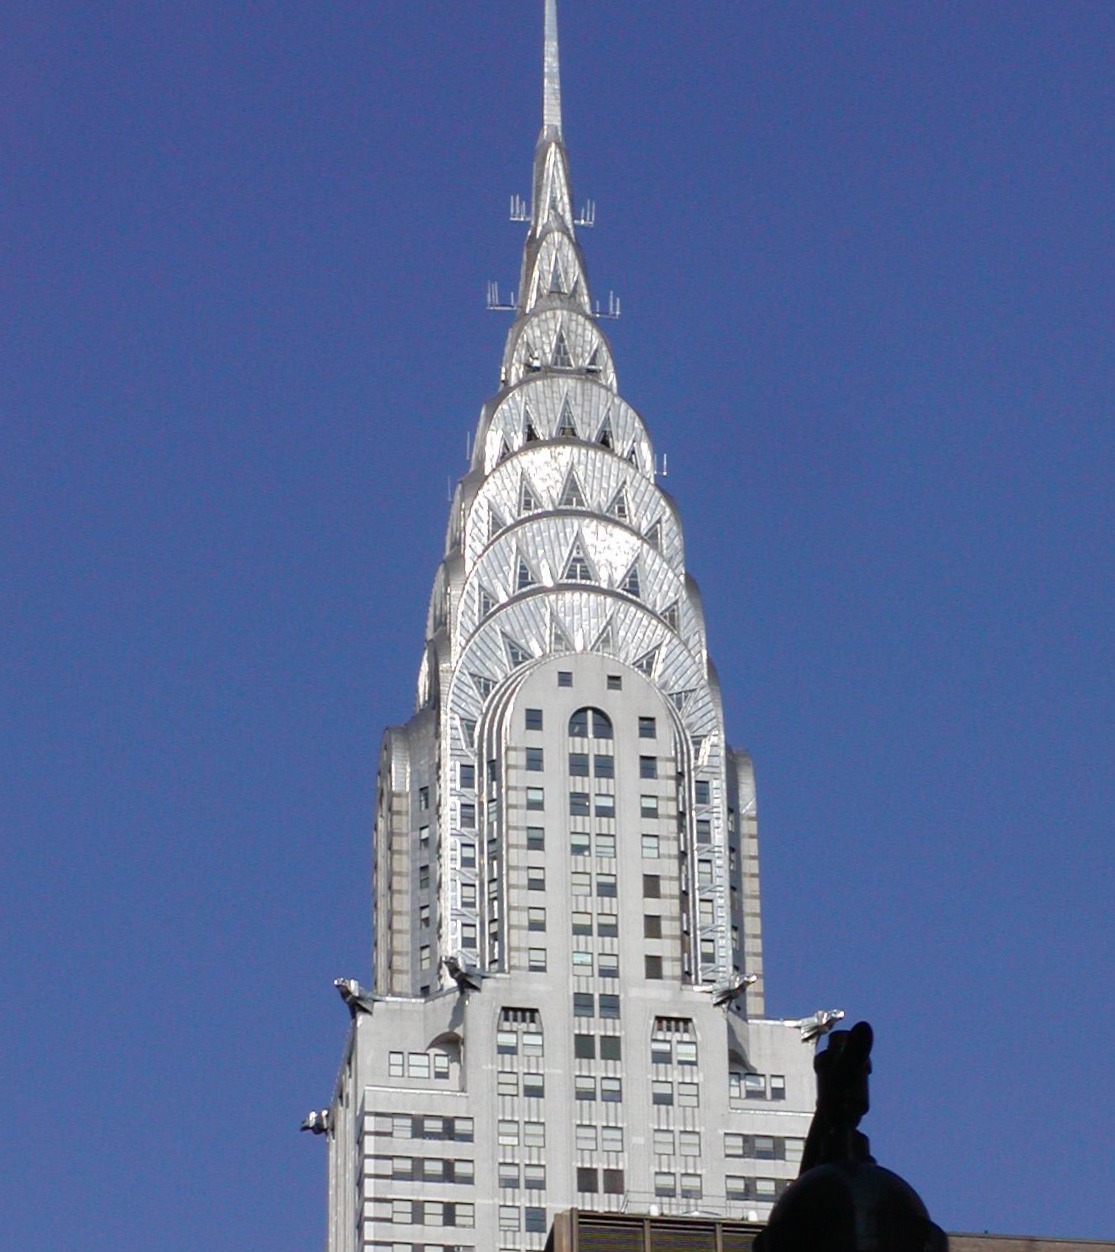 The building's distinctive Art Deco crown and spire